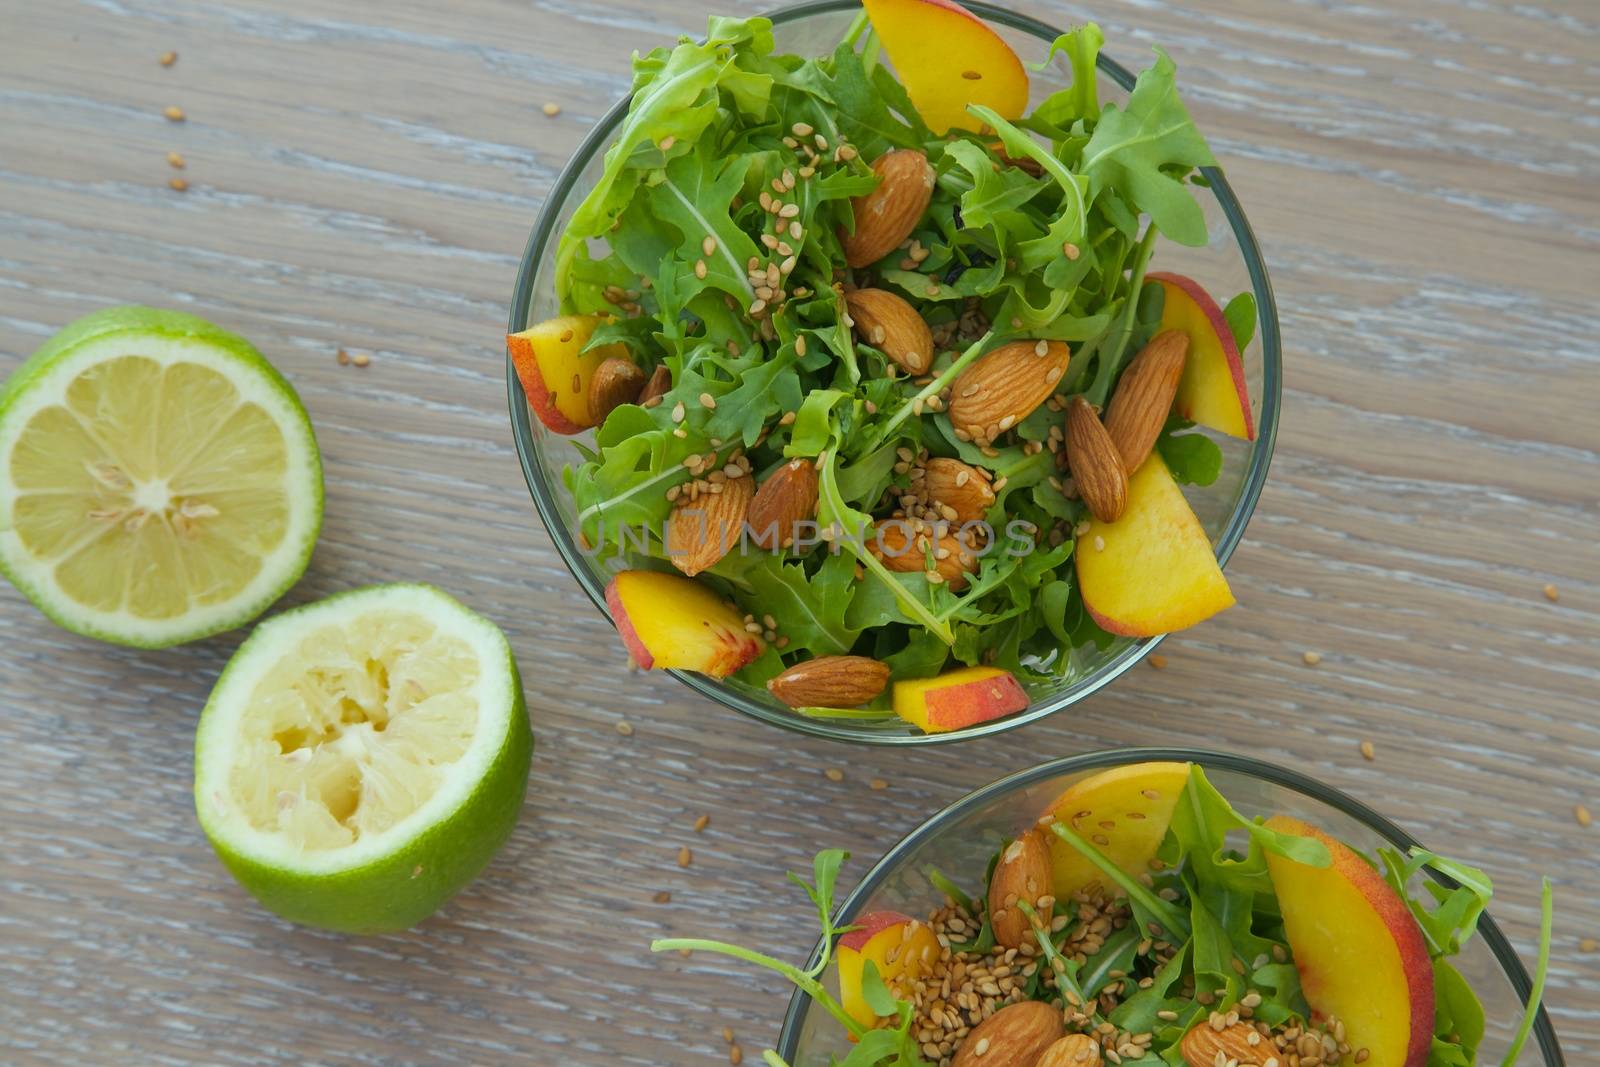 Vitamin salad- rucola with almond, peach and sesame seeds in glass dish. Squeezed lemon in the background. Top view